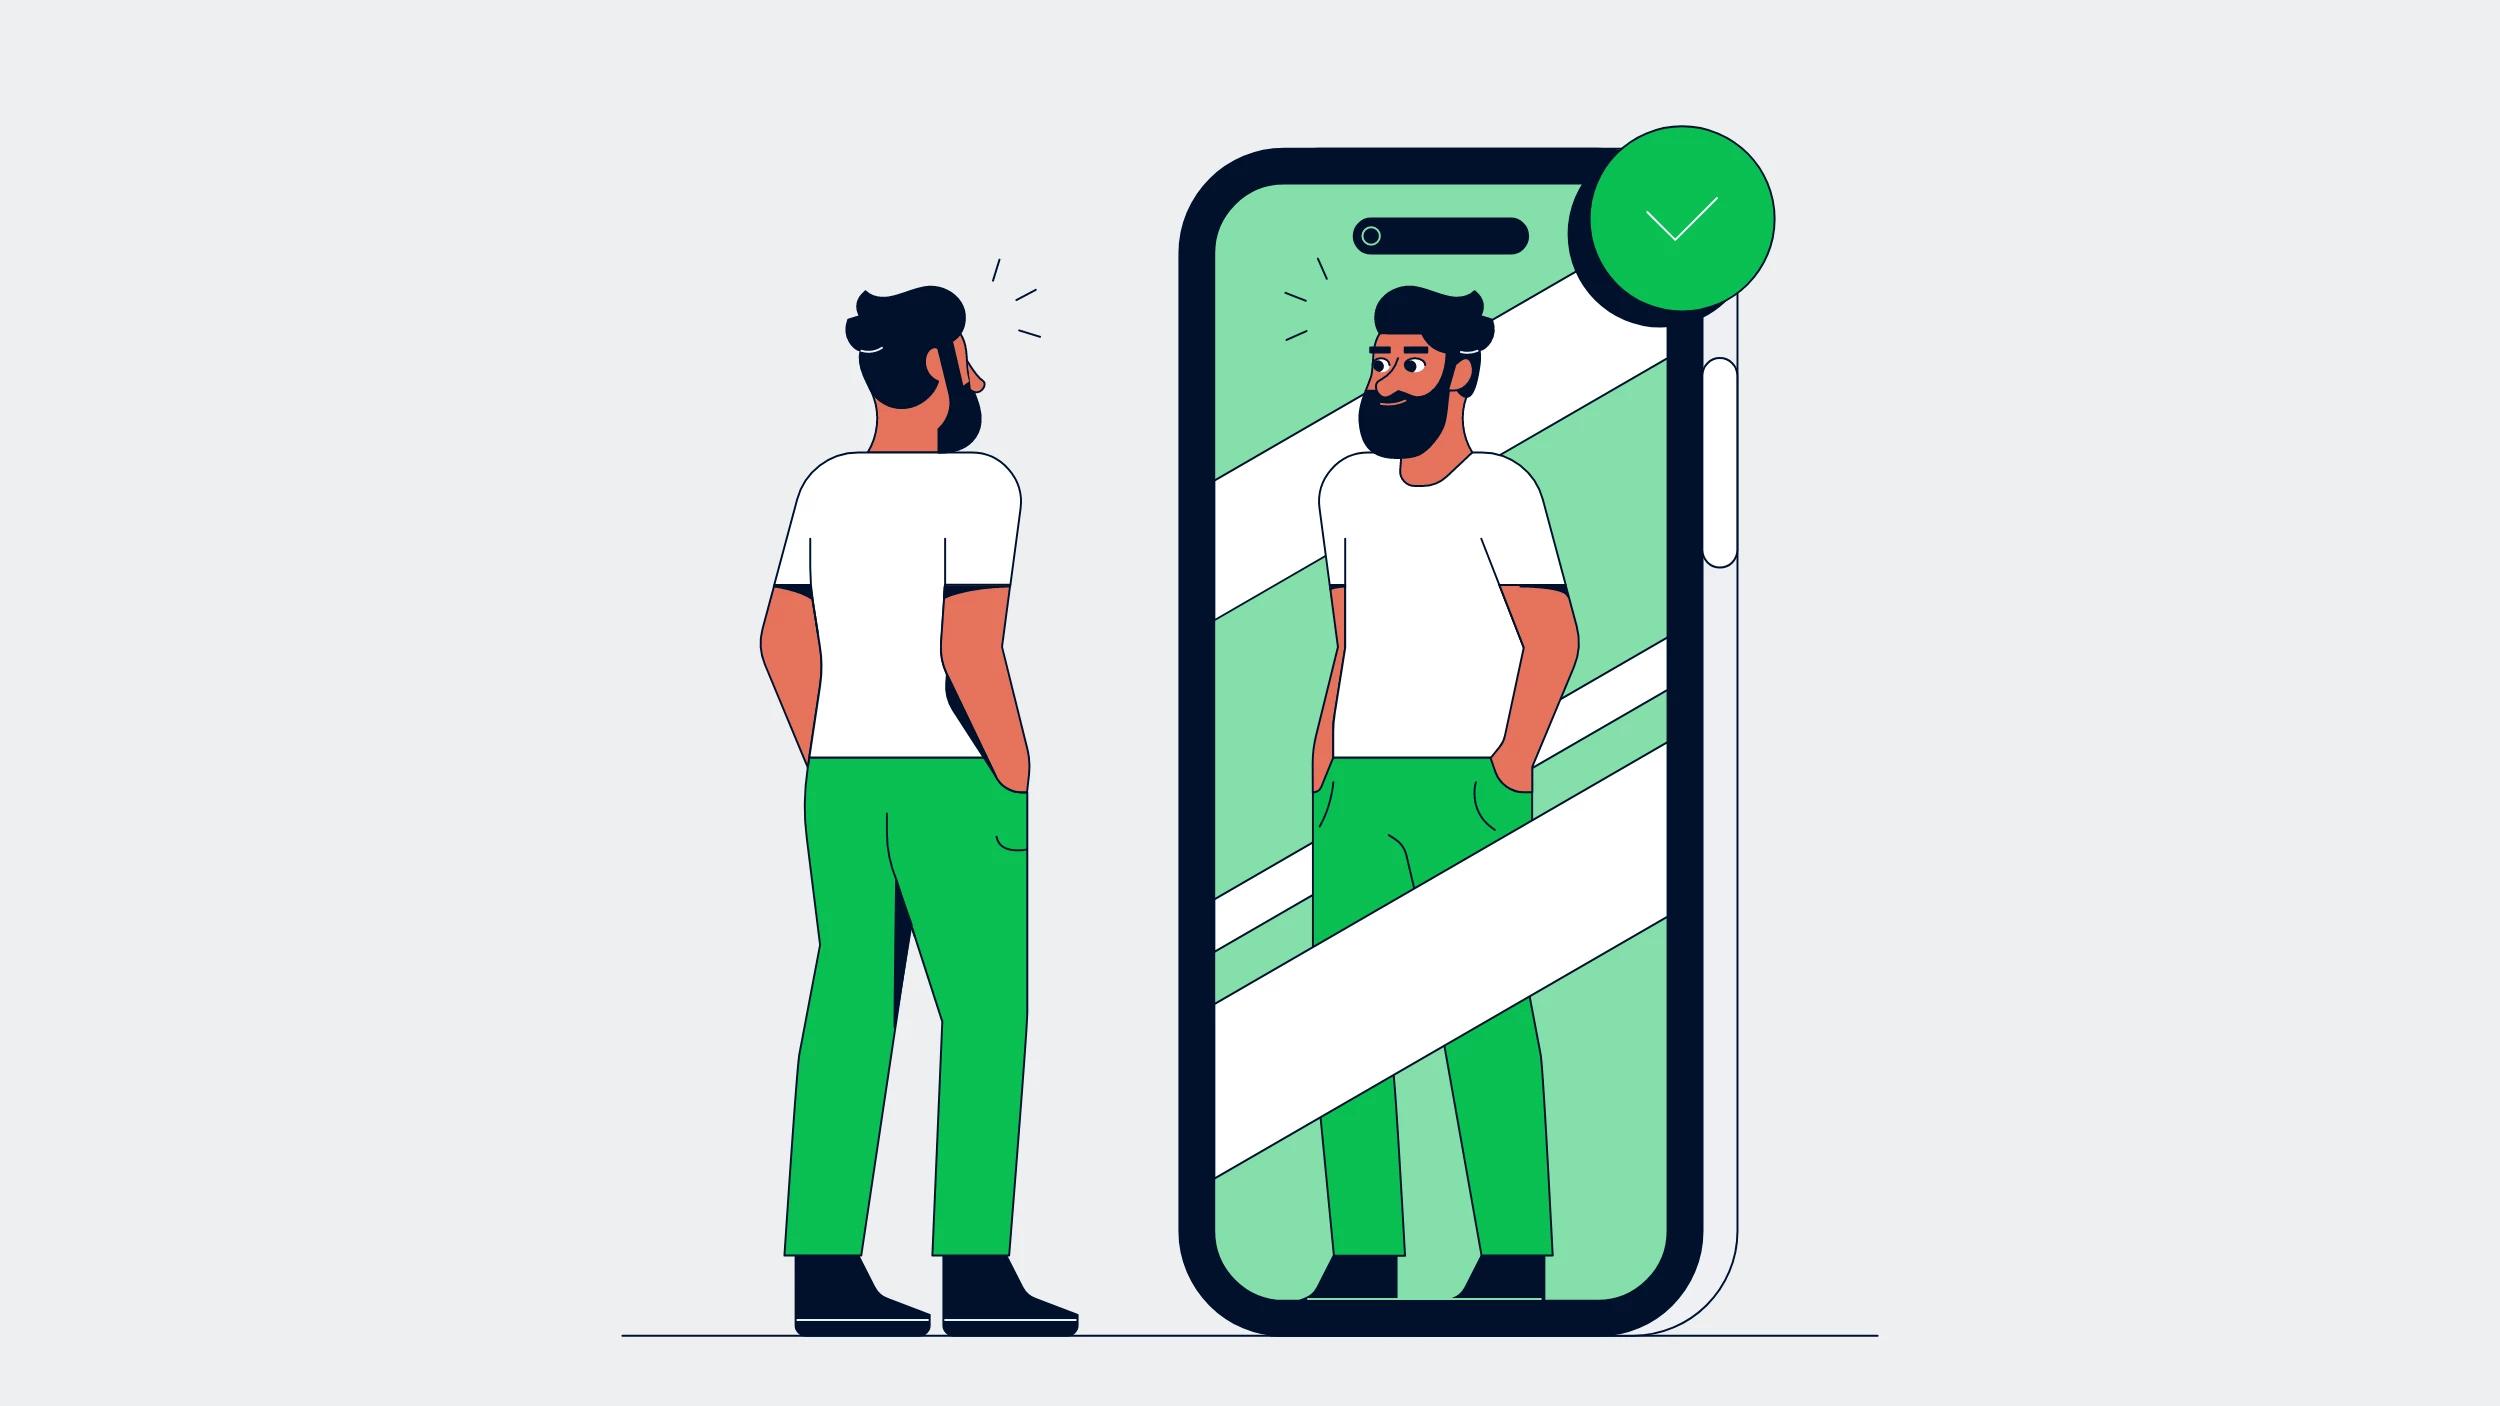 An illustration of a man looking at the reflection of himself in a phone representing an successful authentication experience